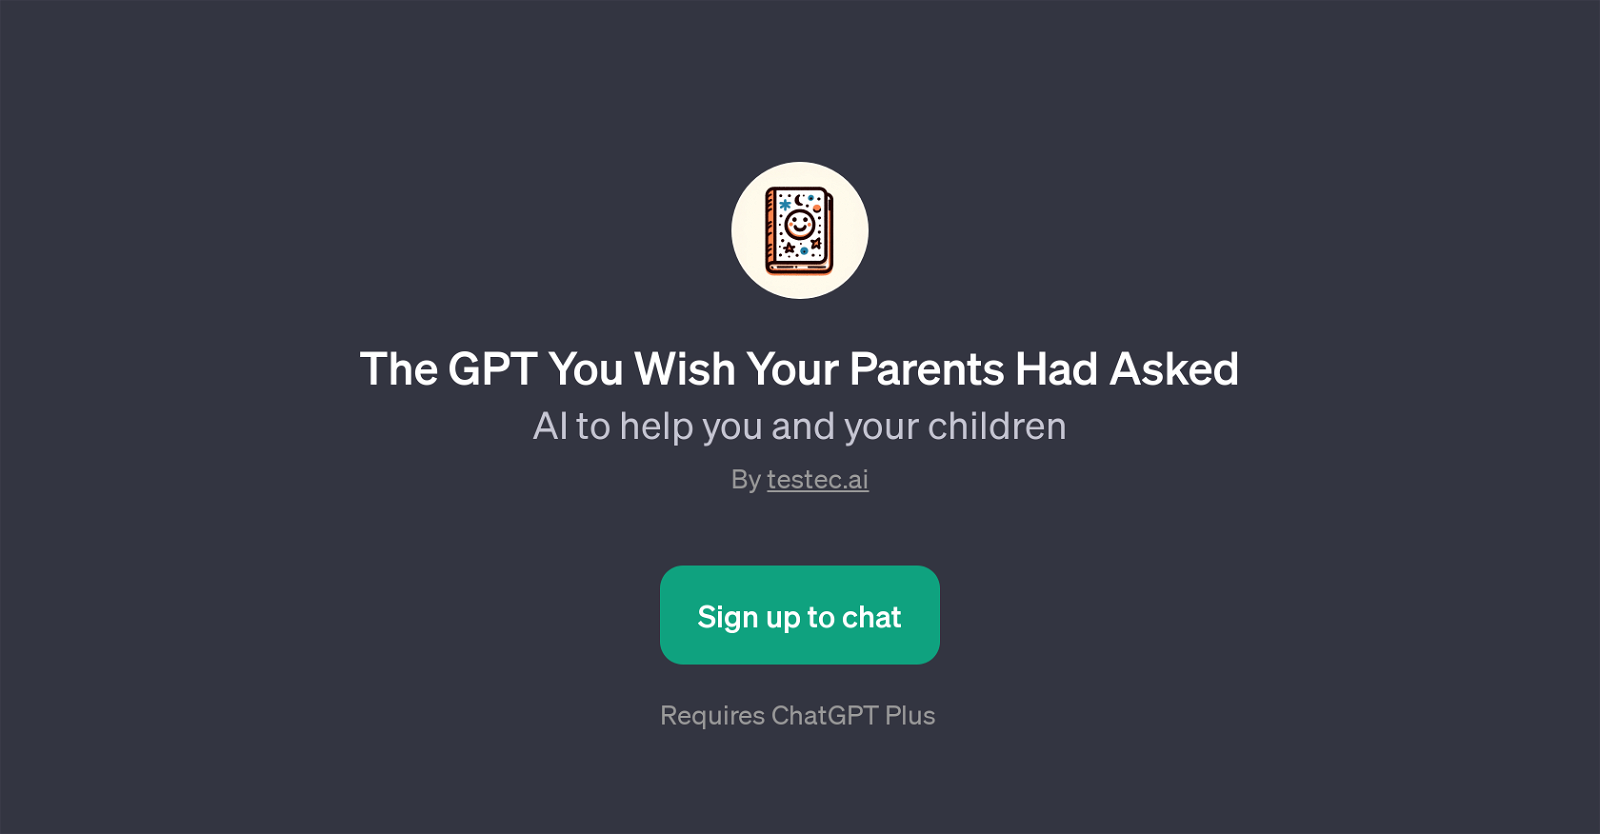 The GPT You Wish Your Parents Had Asked website